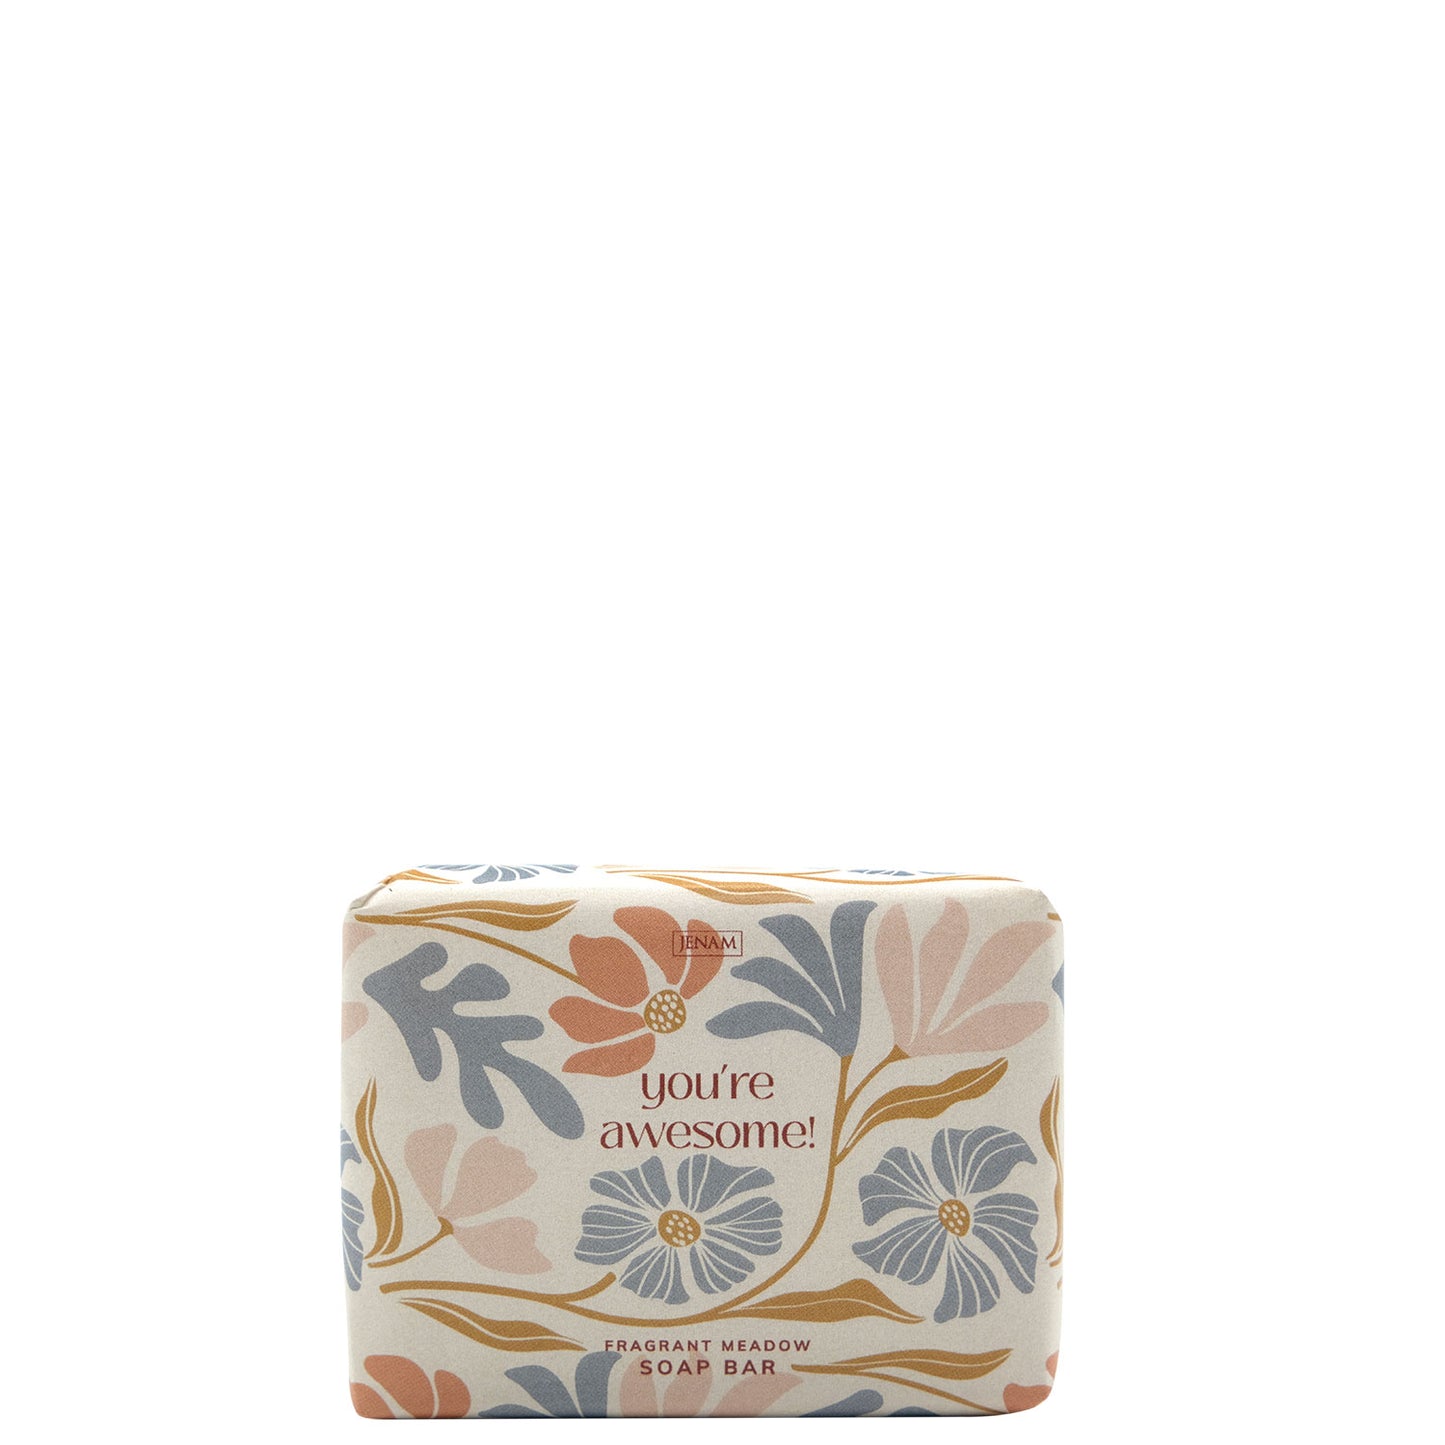 Just Saying Fragranced Soap (You're Awesome) - 125g